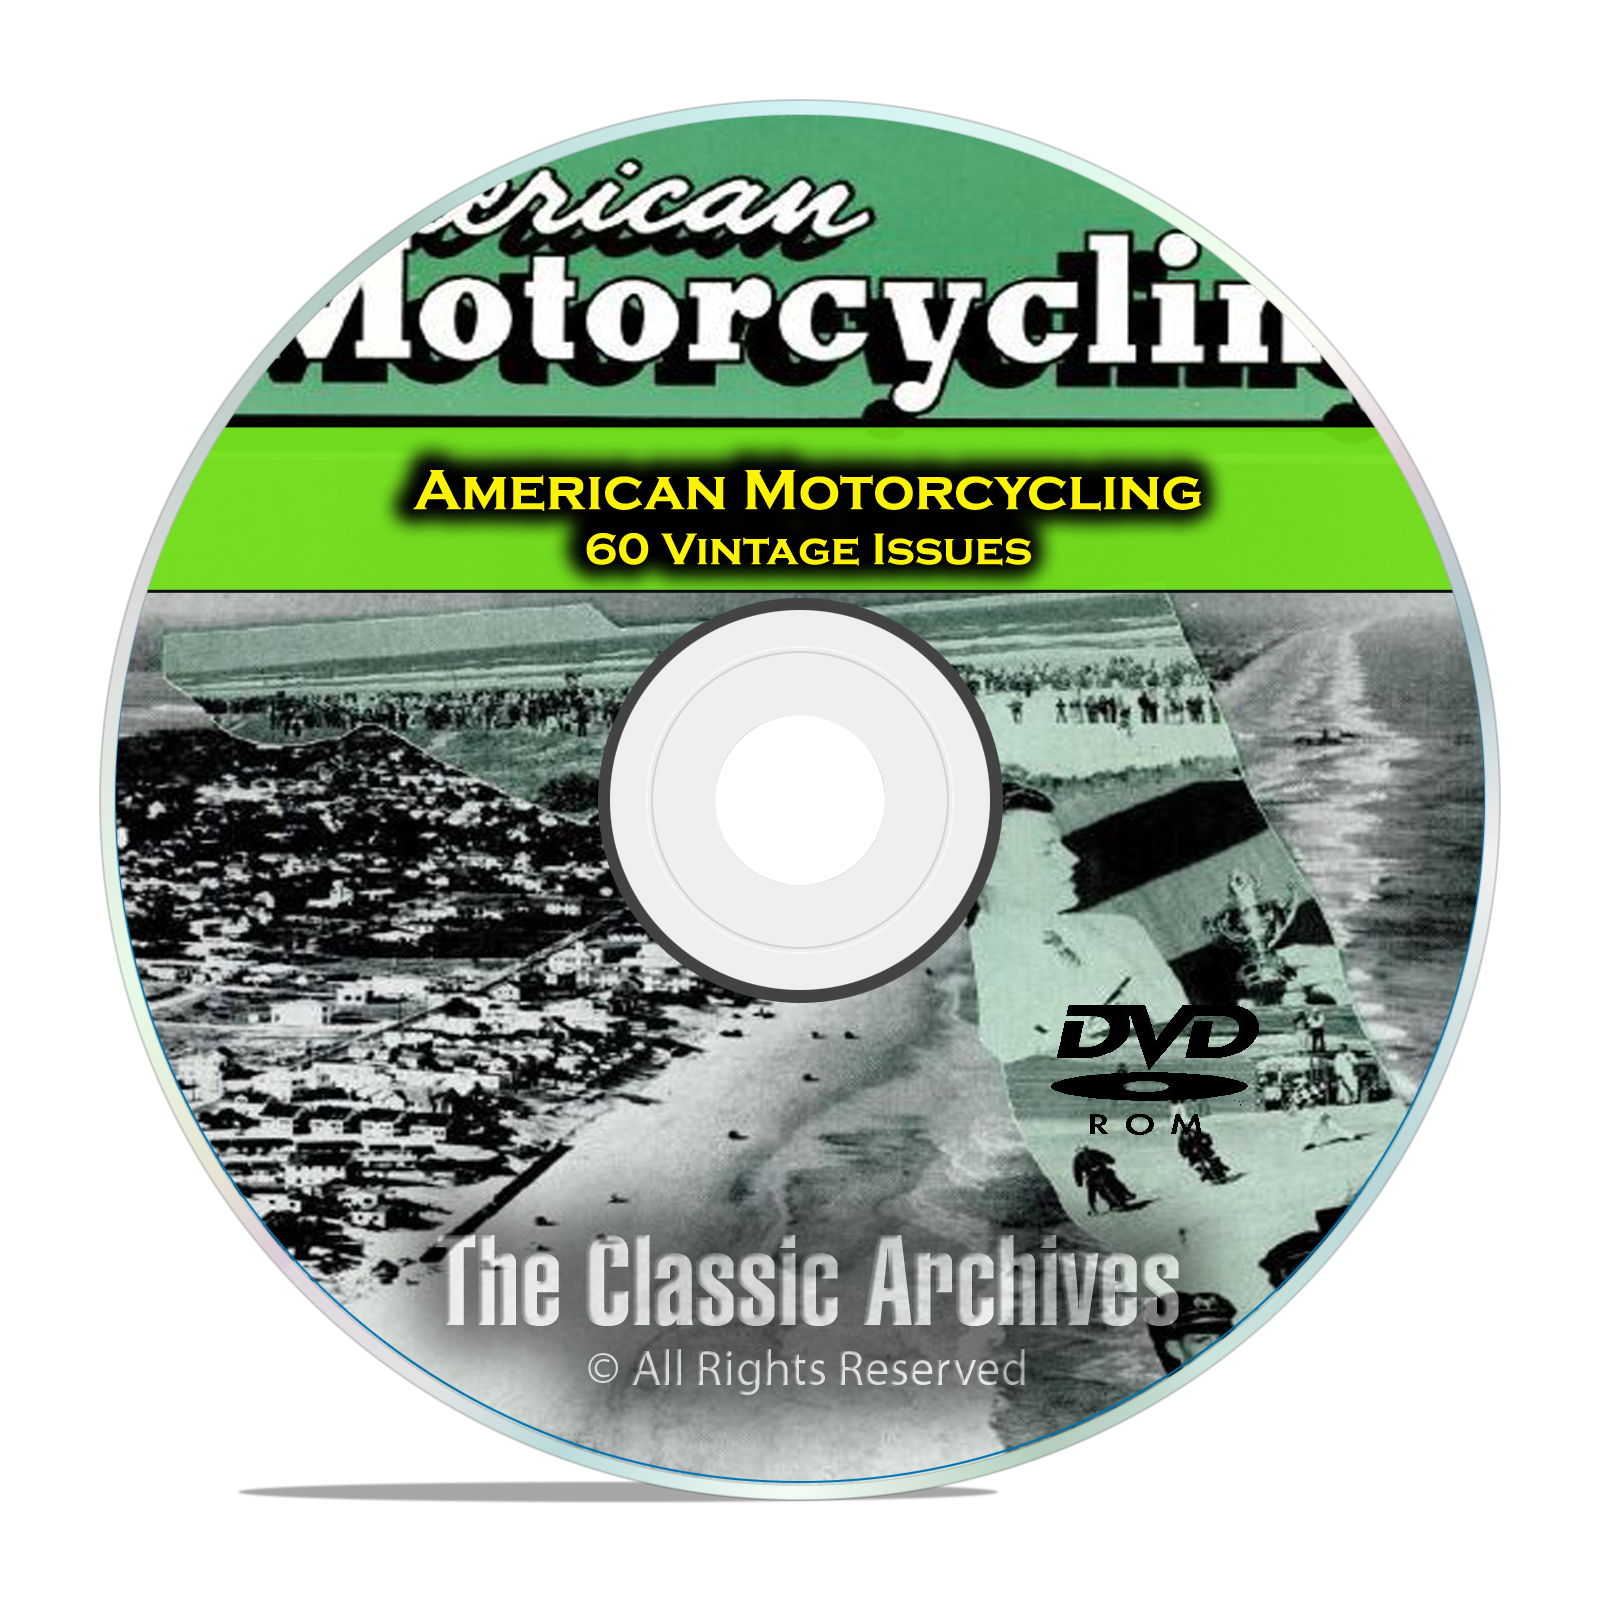 American Motorcycling Magazine, 60 Issues, 1955-1959, Americana History DVD